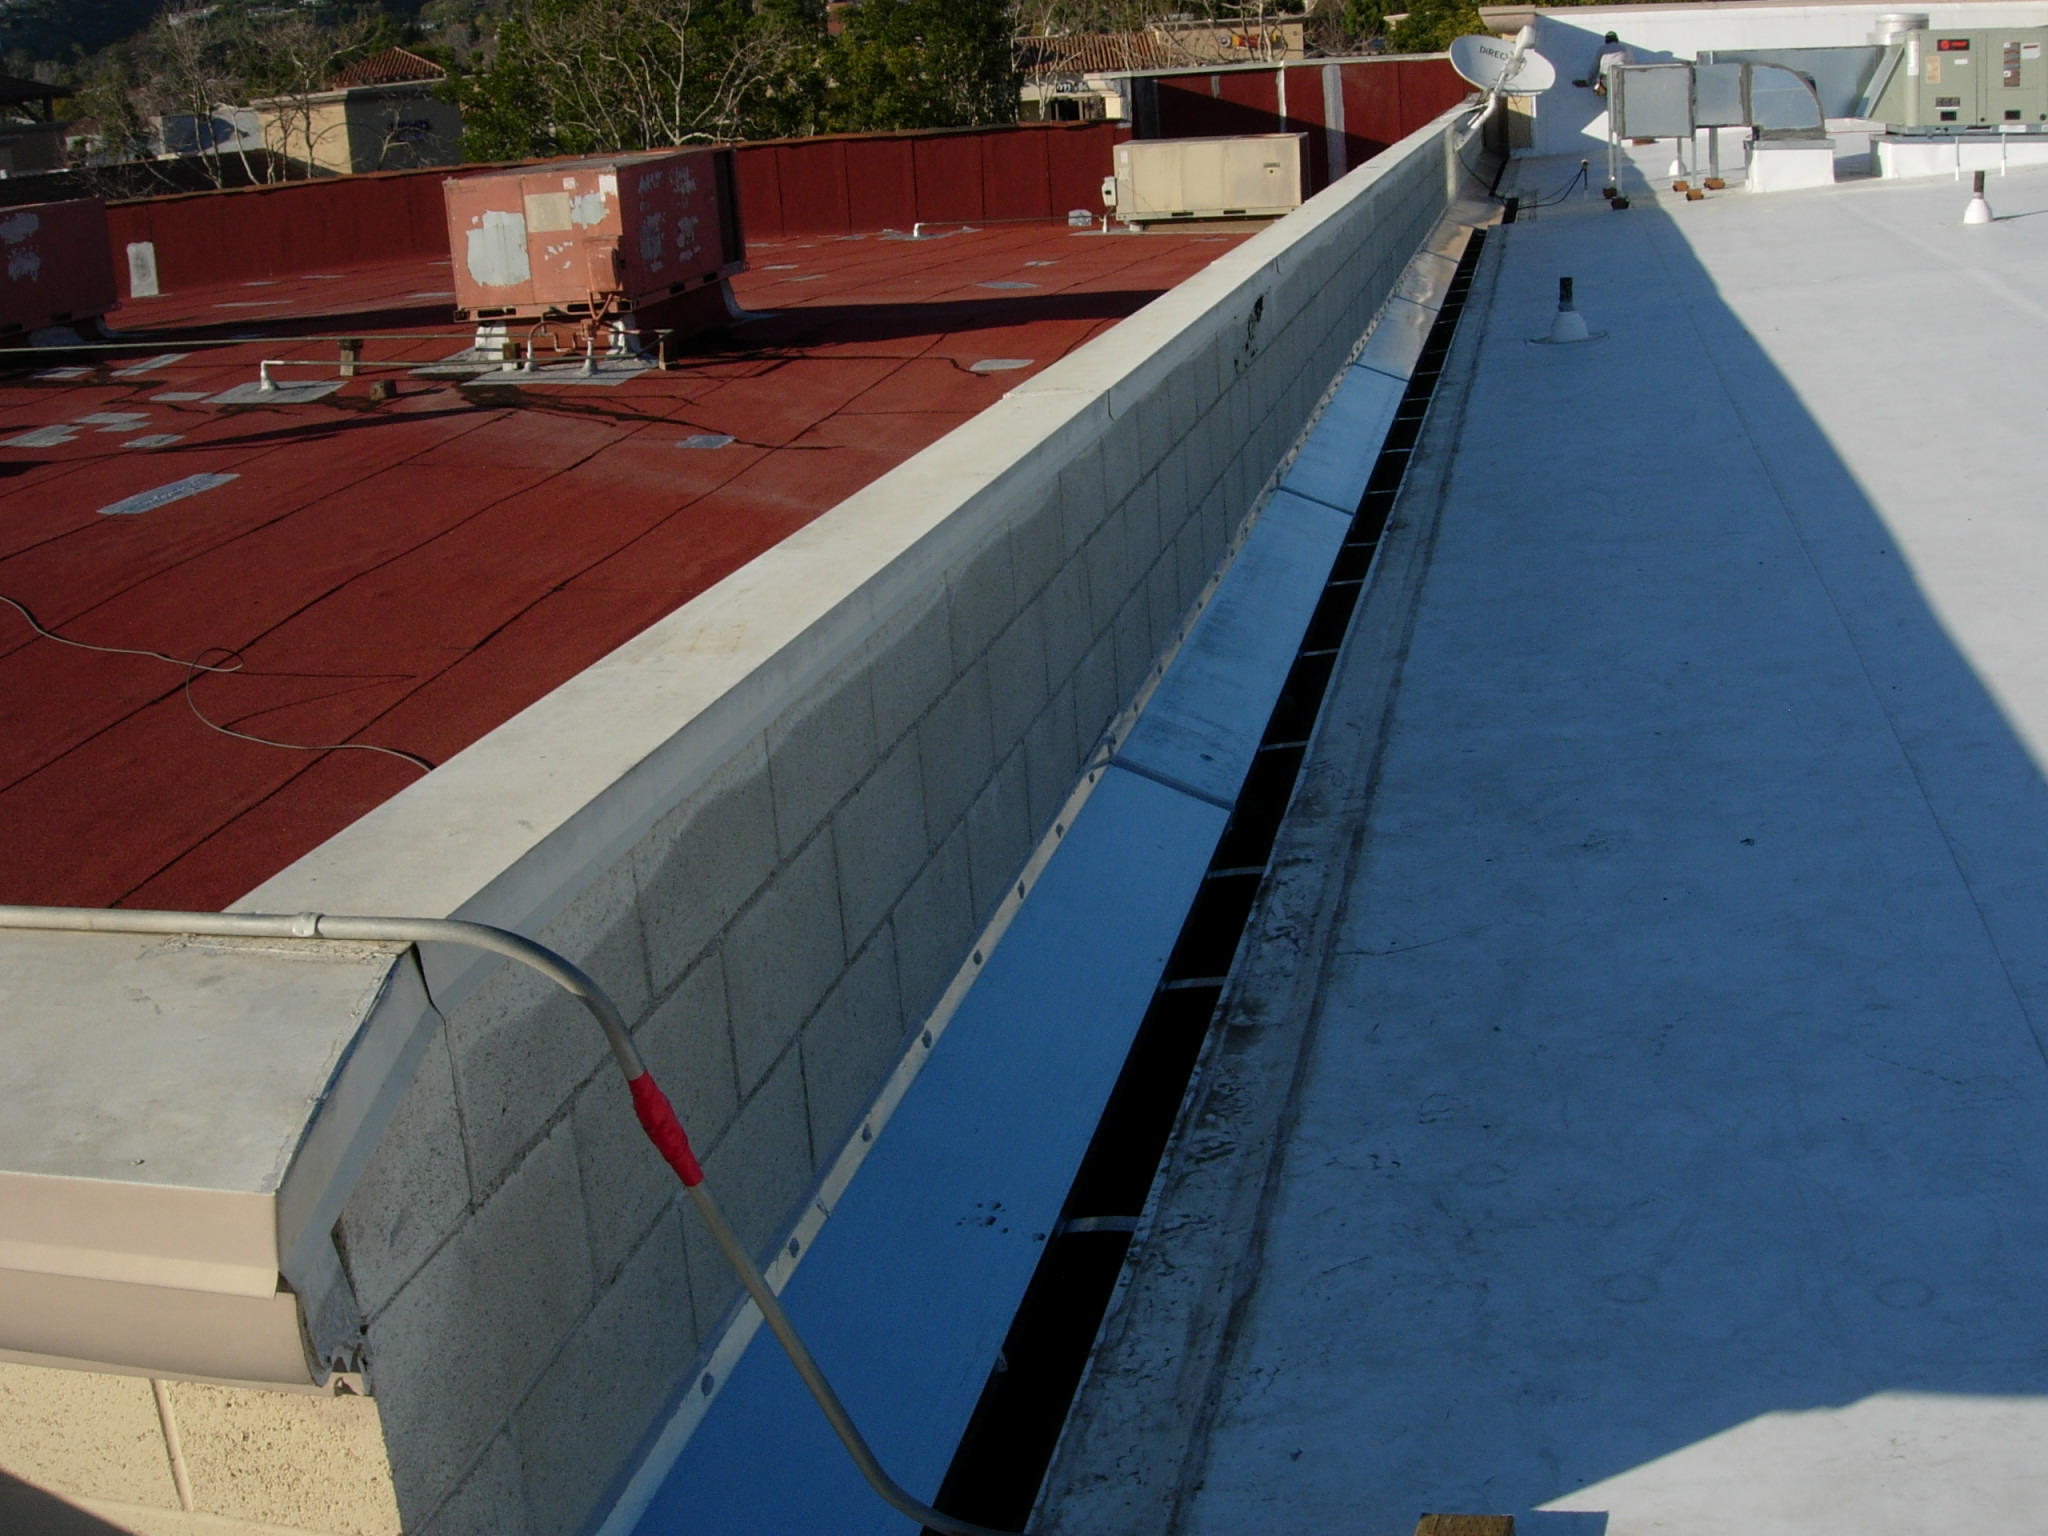 Expansion_sheet_Metal | FC and Sons Roofing Protfolio | Commercial and Industrial Roofing in California | Commercial and Industrial Roofing in Nevada | Commercial and Industrial Roofing in Arizona